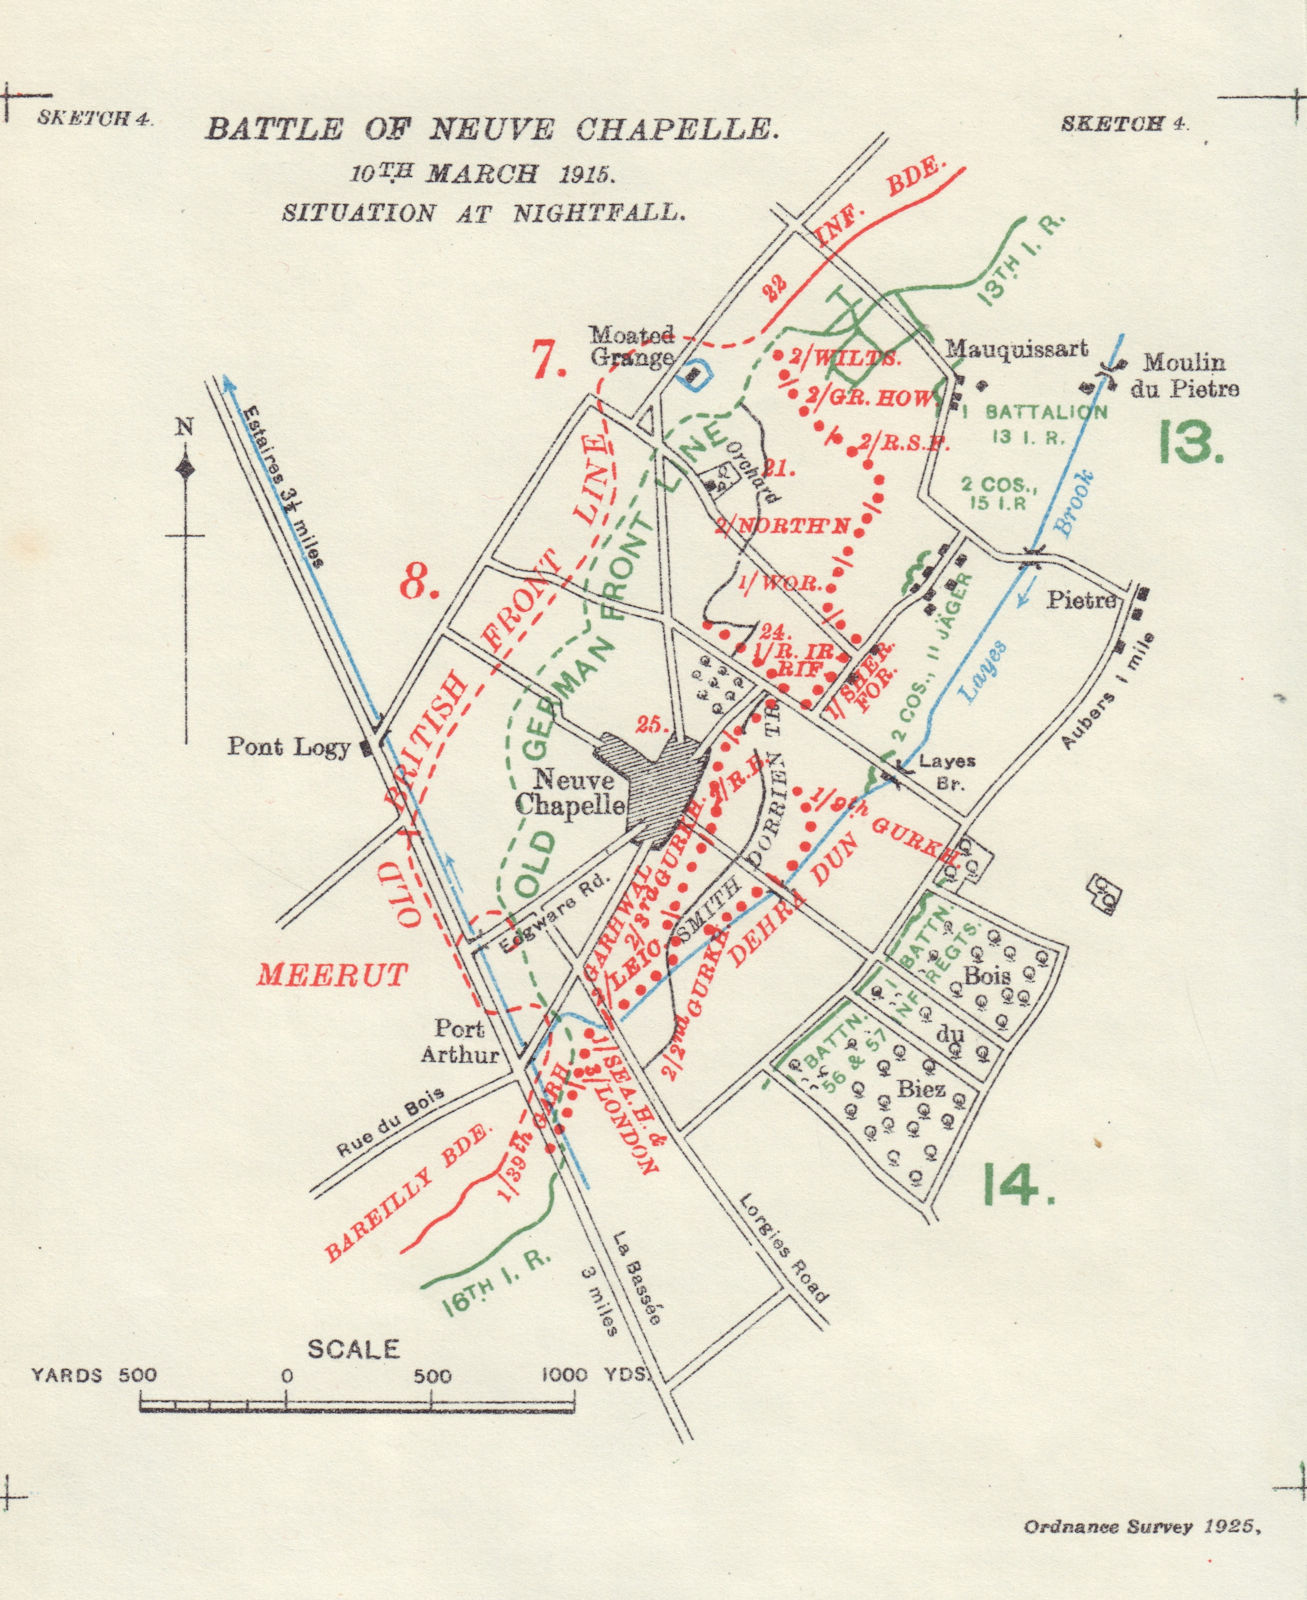 Battle of Neuve Chapelle 10th March 1915. Nightfall situation. Trenches 1927 map